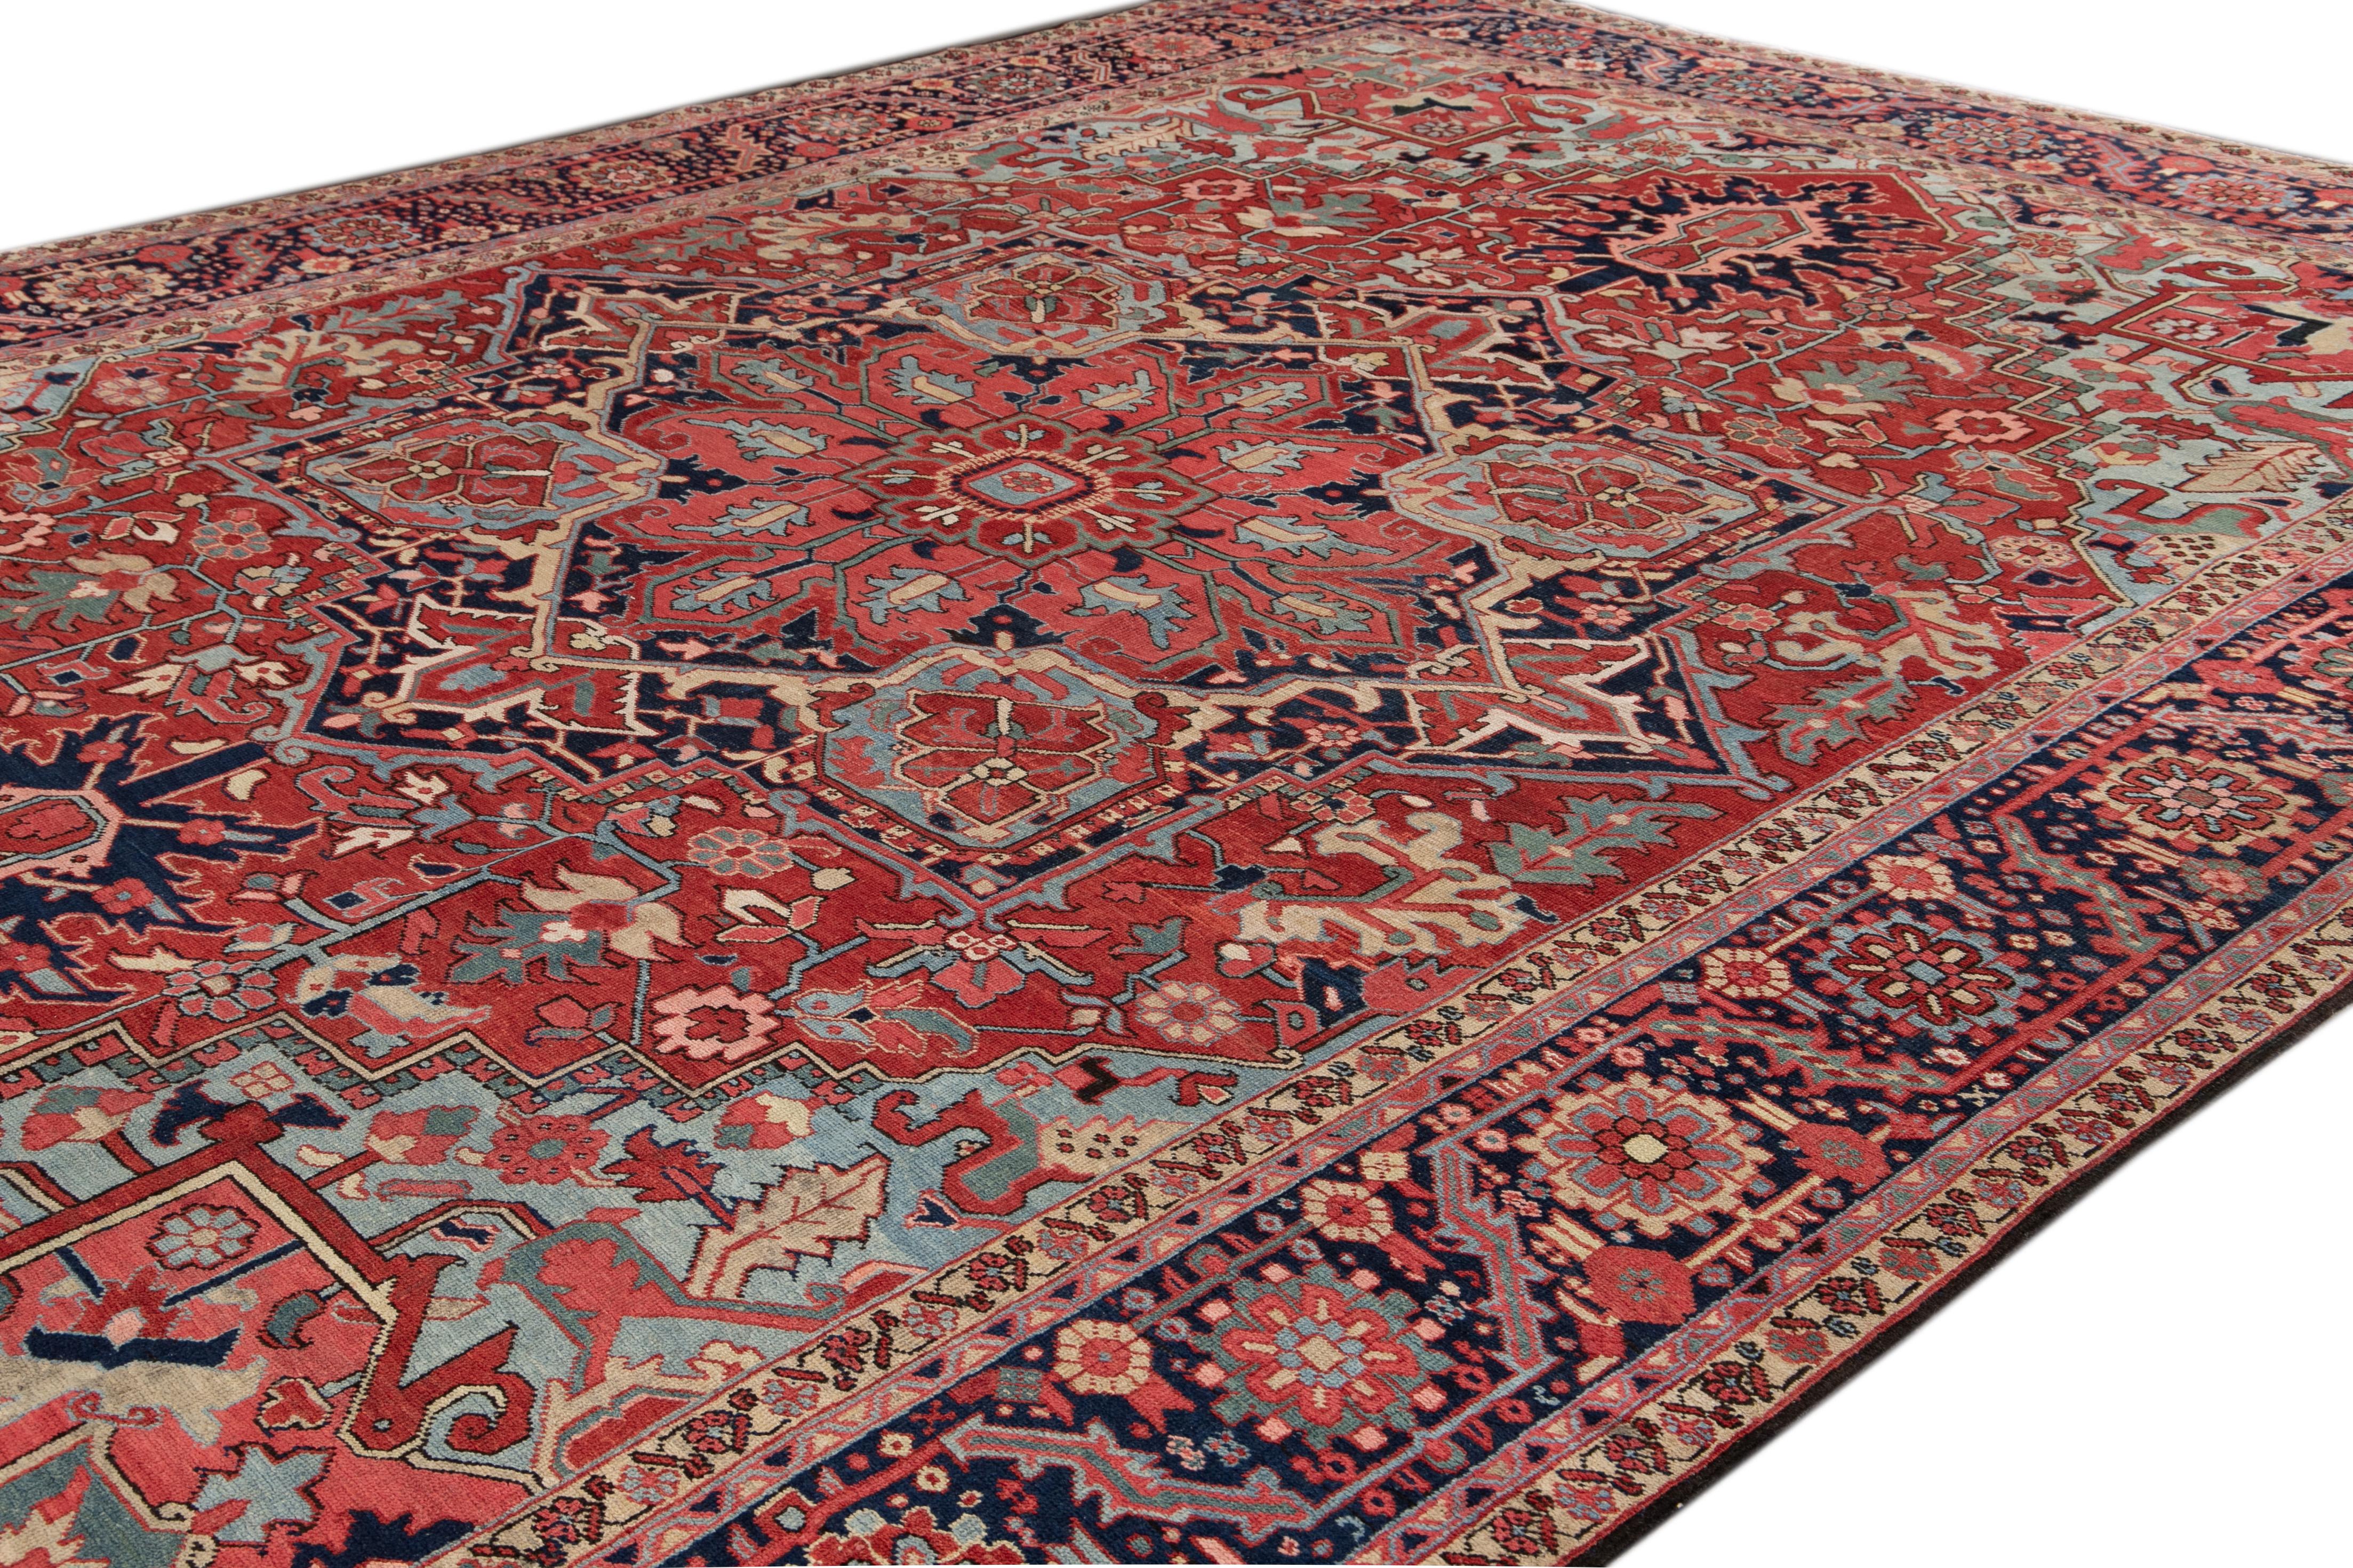 Oversize Antique Heriz Handmade Red & Blue Medallion Motif Wool Rug In Distressed Condition For Sale In Norwalk, CT